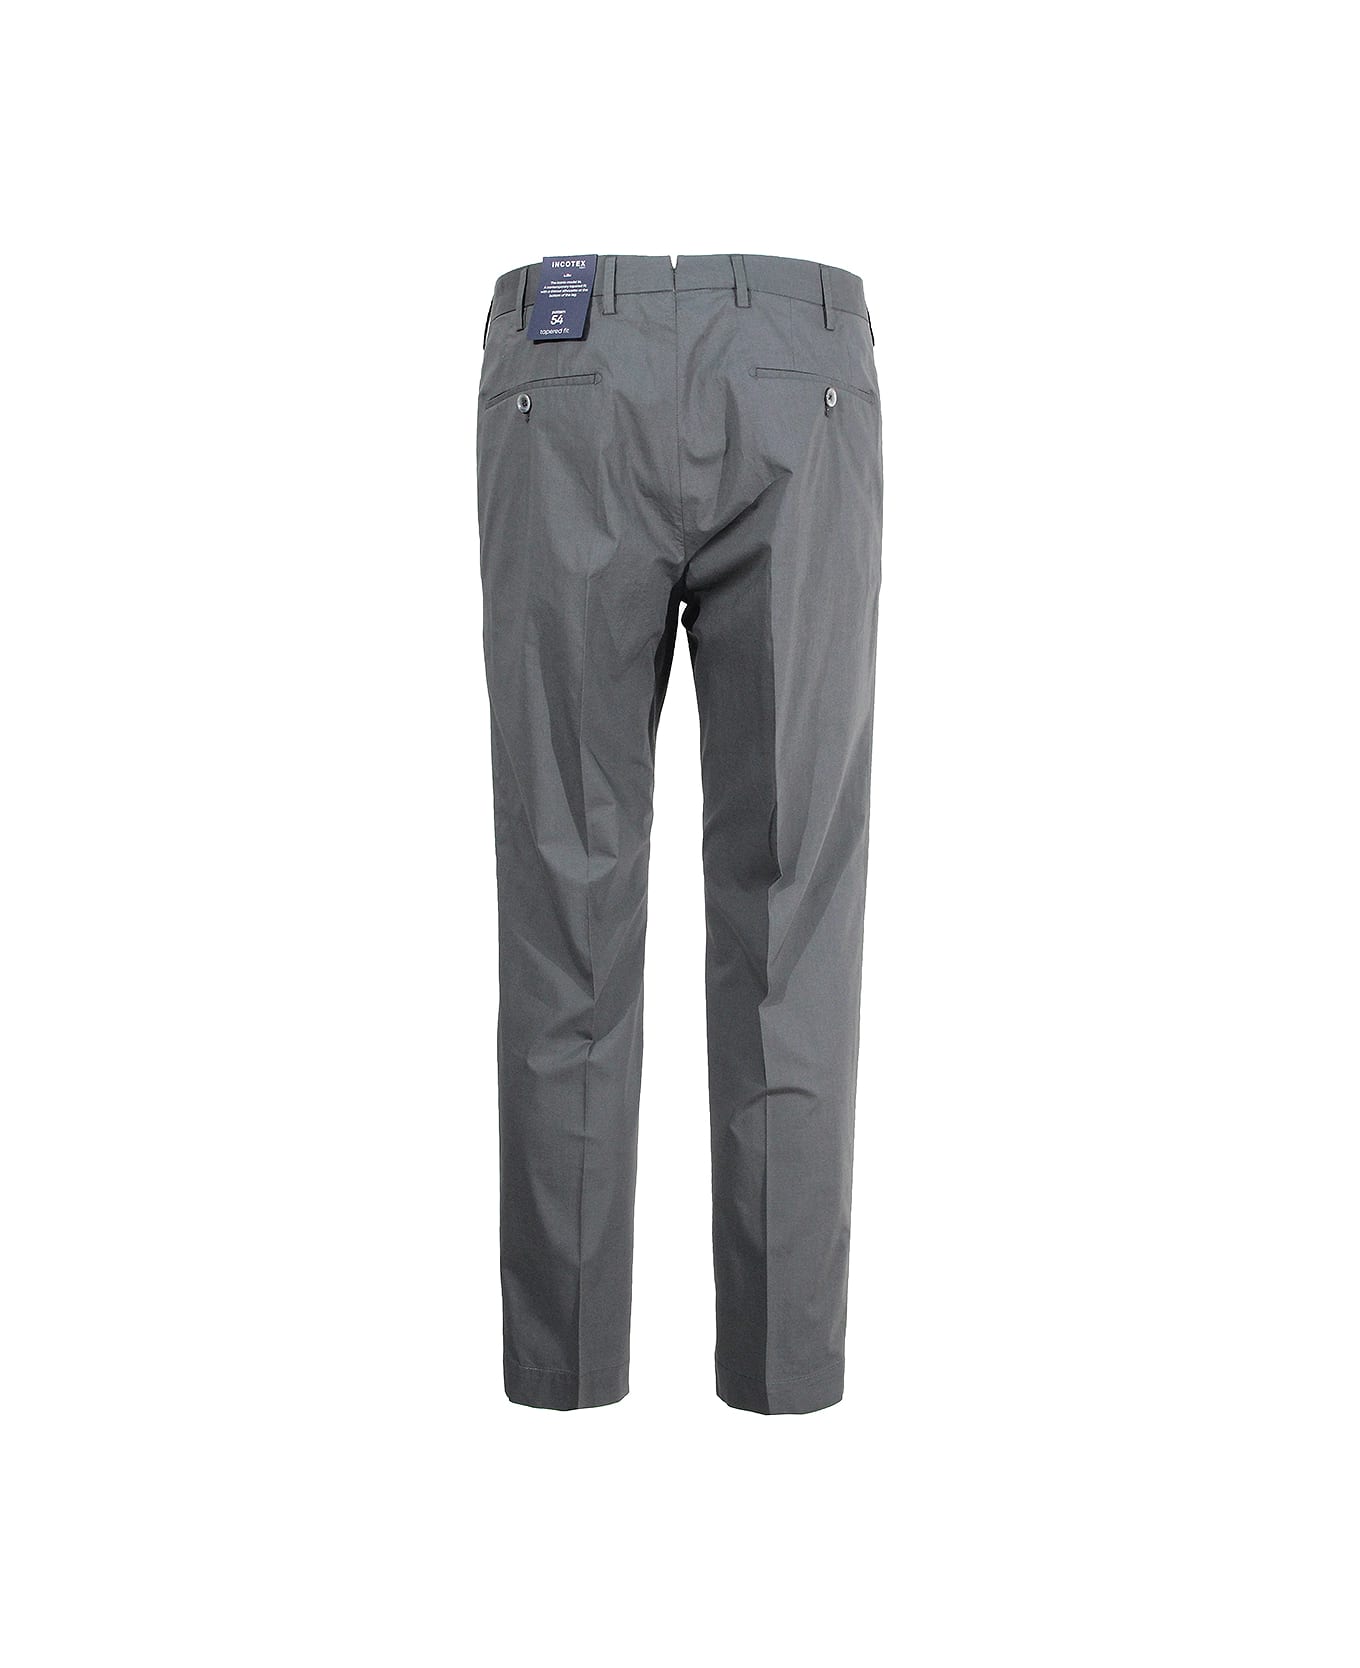 Incotex Trousers With Pleats - Grey ボトムス